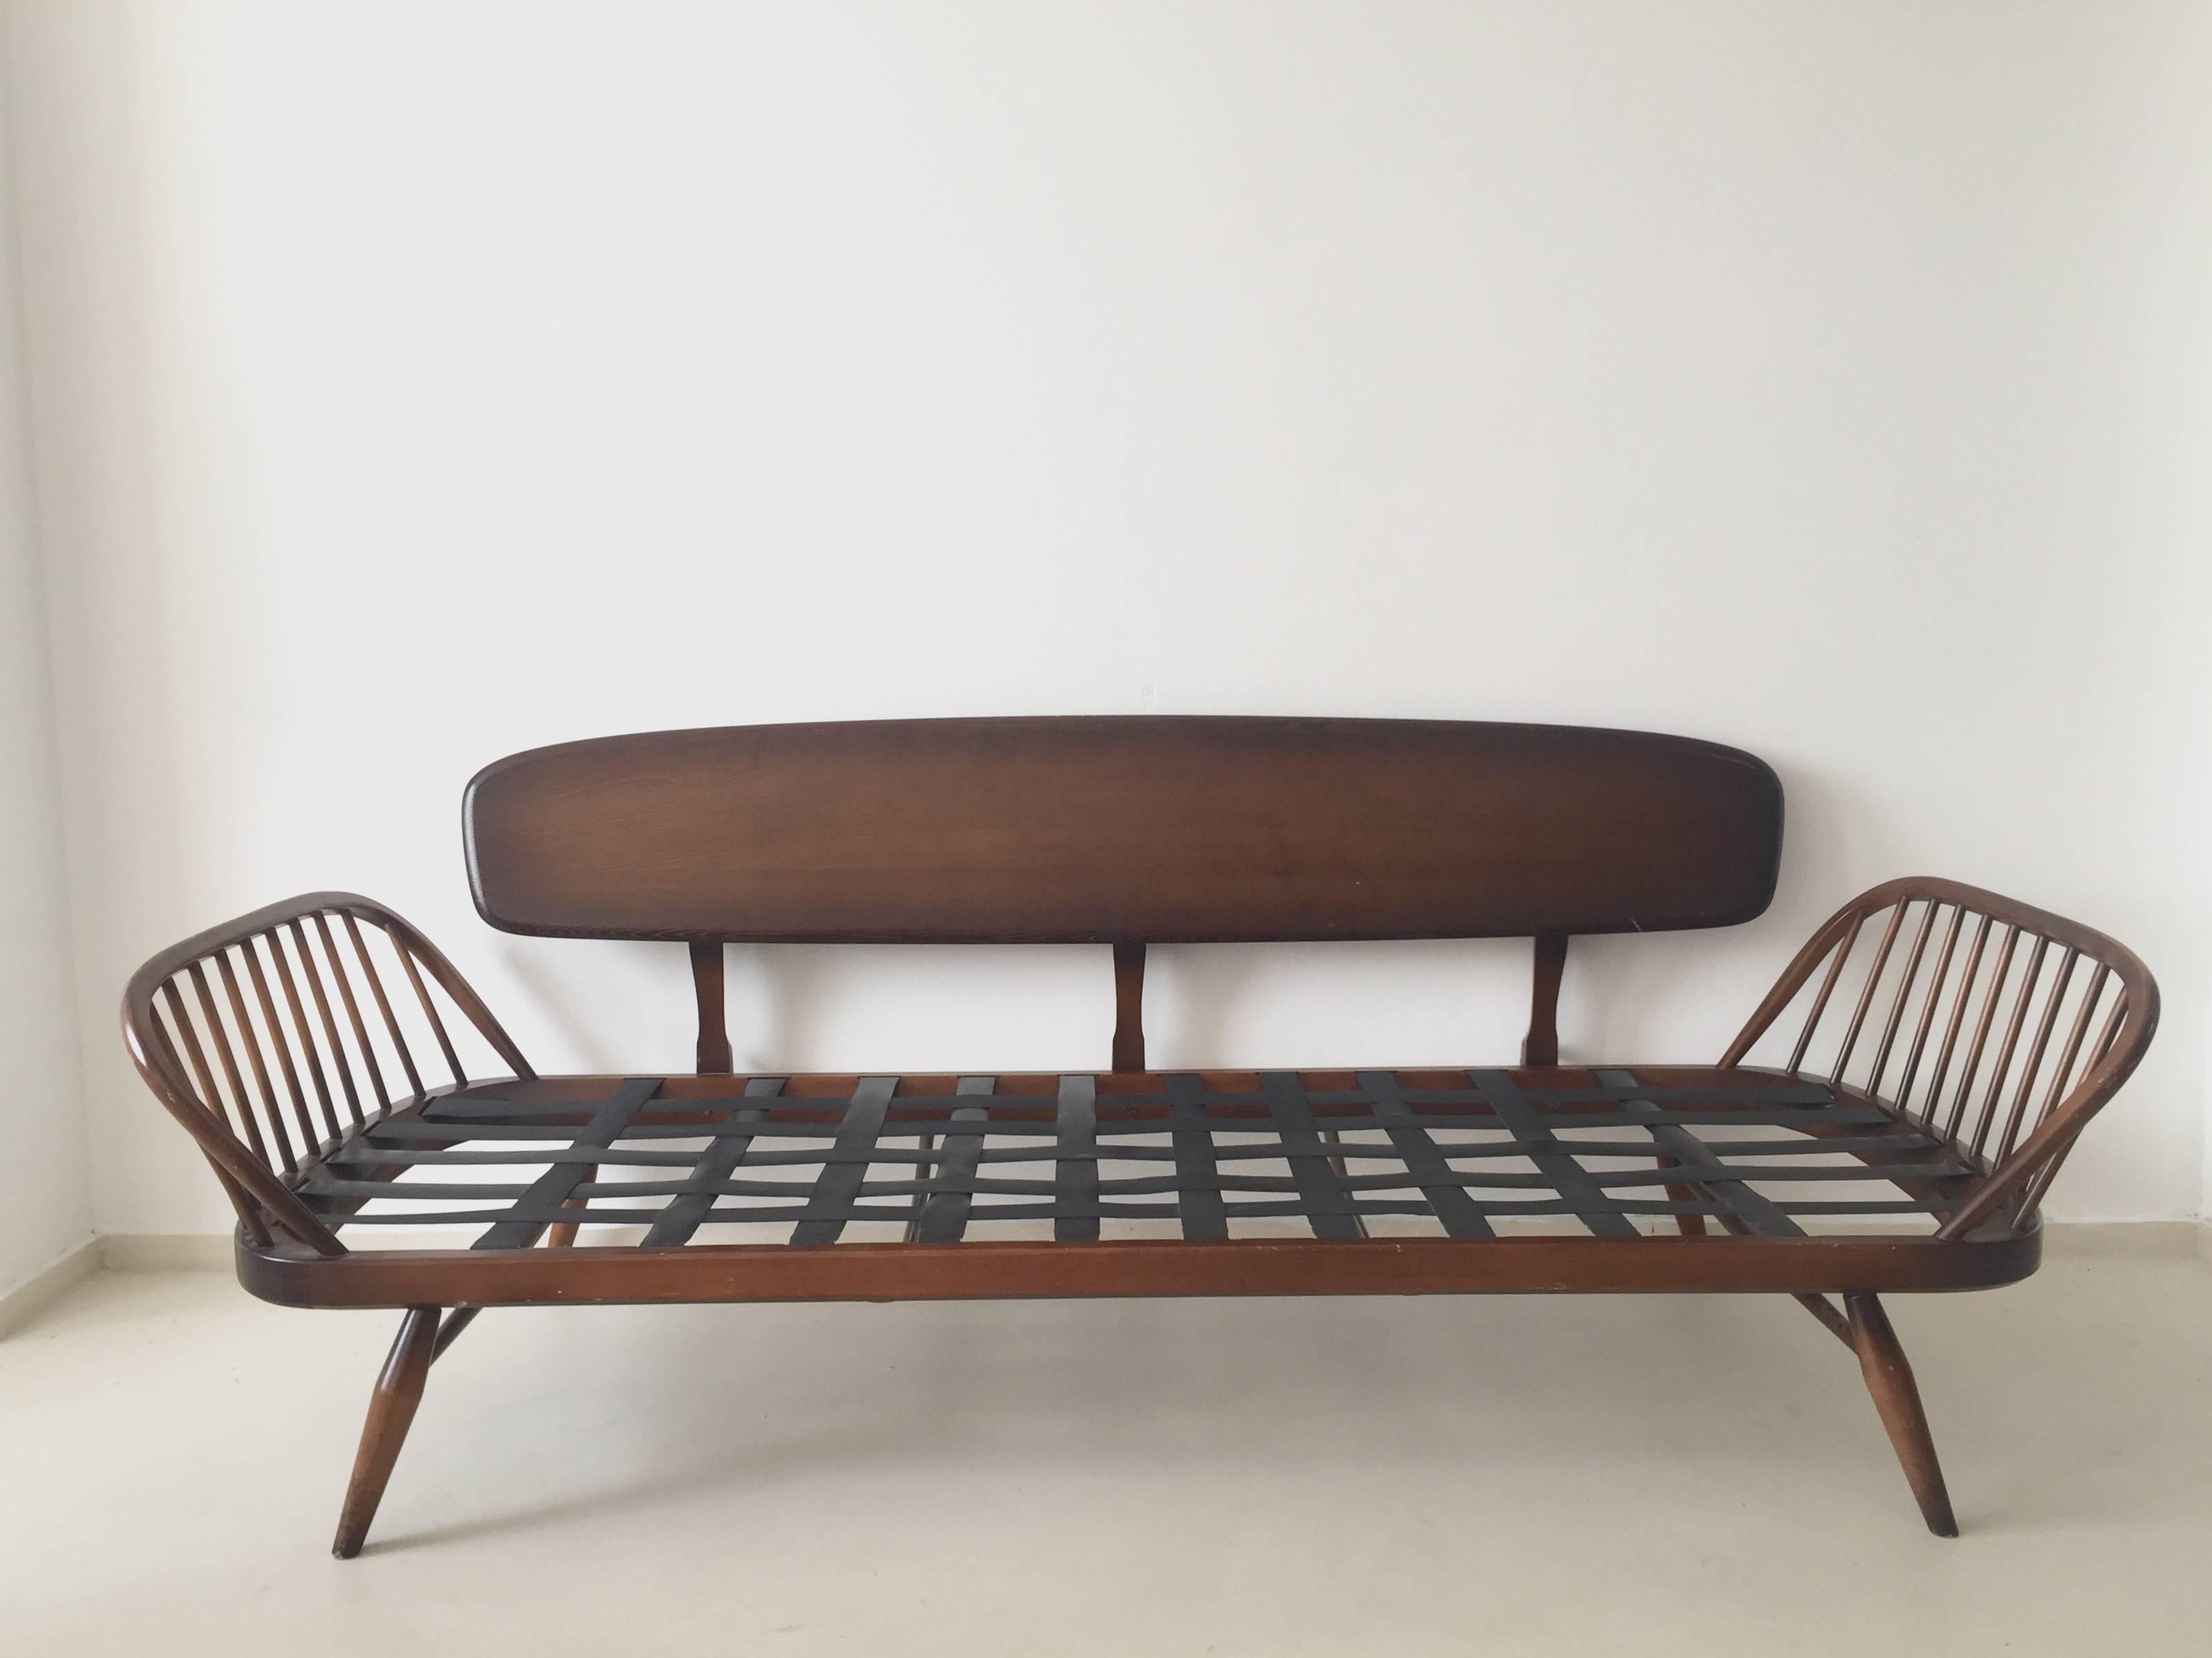 British Studio Sofa, Daybed, Couch, Model 355 Designed by Lucian Ercolani in the 1950s